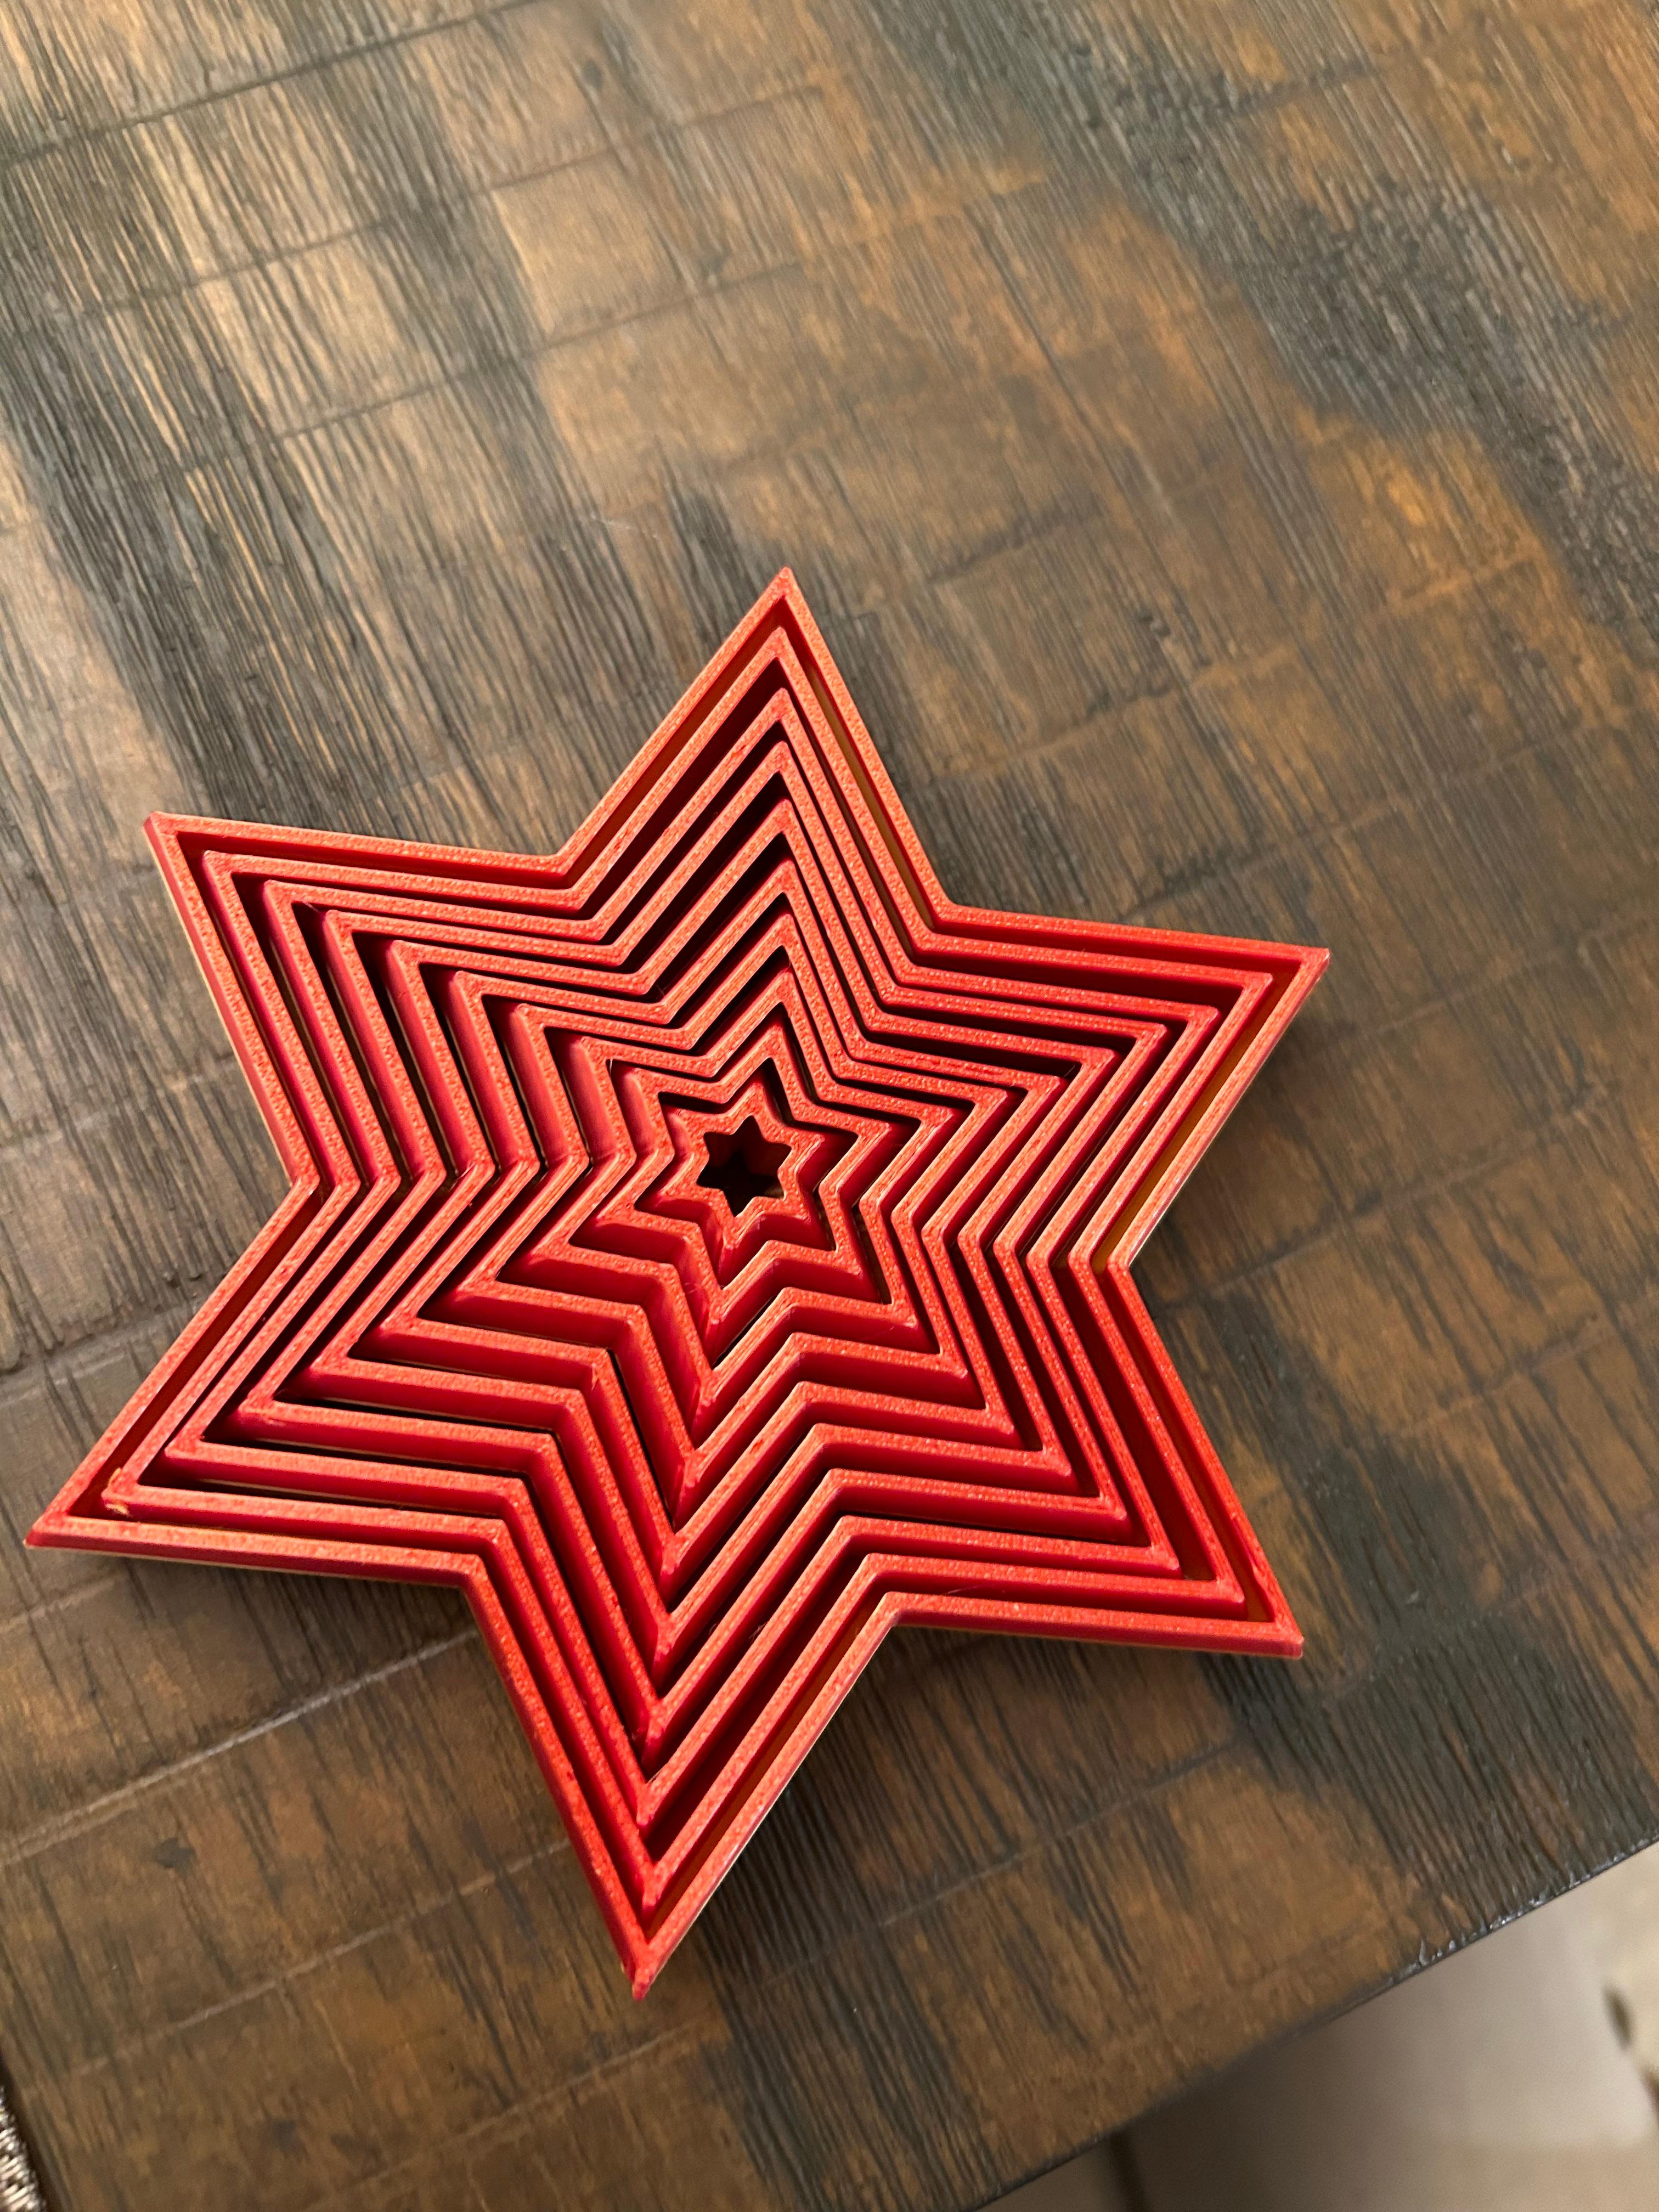 print in place 6 pointed collapsing star 3d model